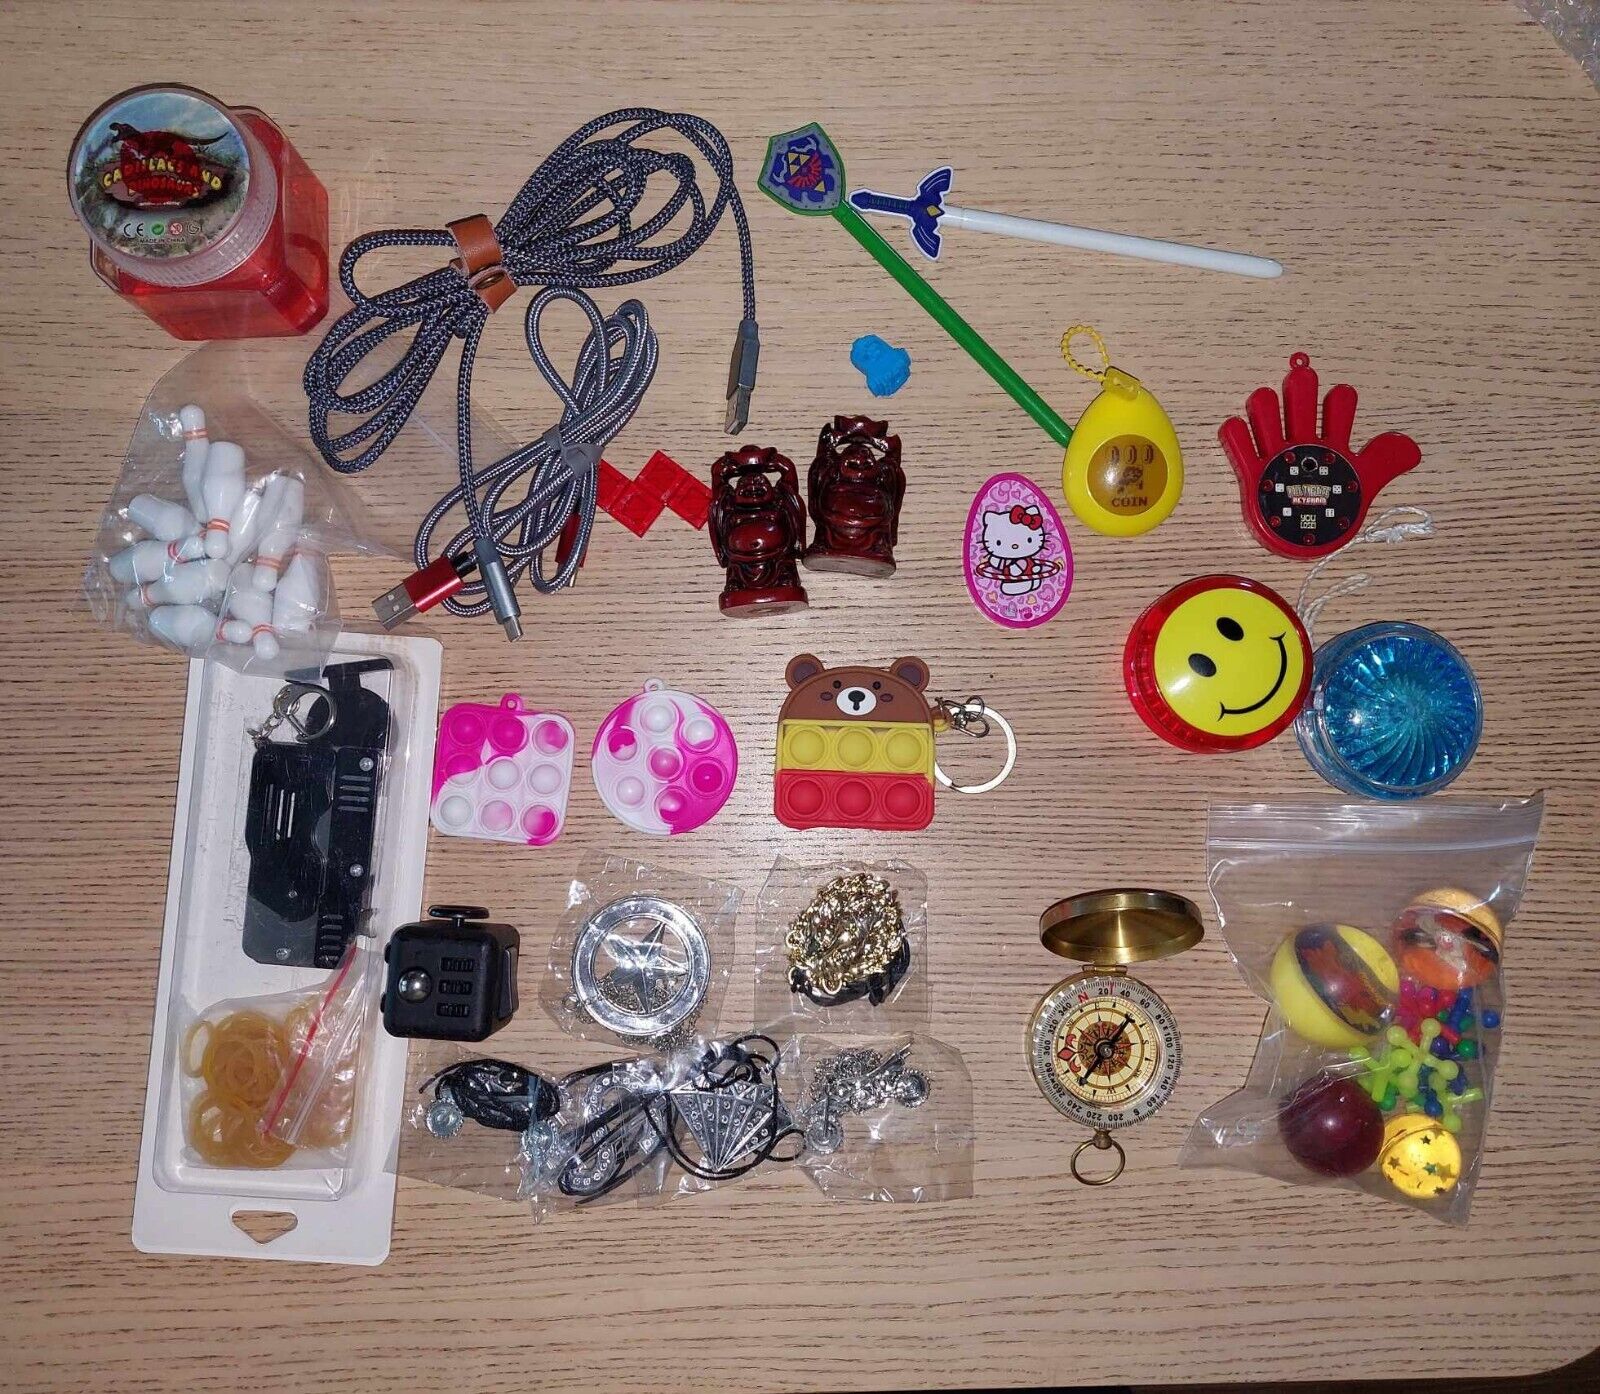 Junk Drawer Lot Mostly Toys Some Miscellaneous Items Used Good Condition Items